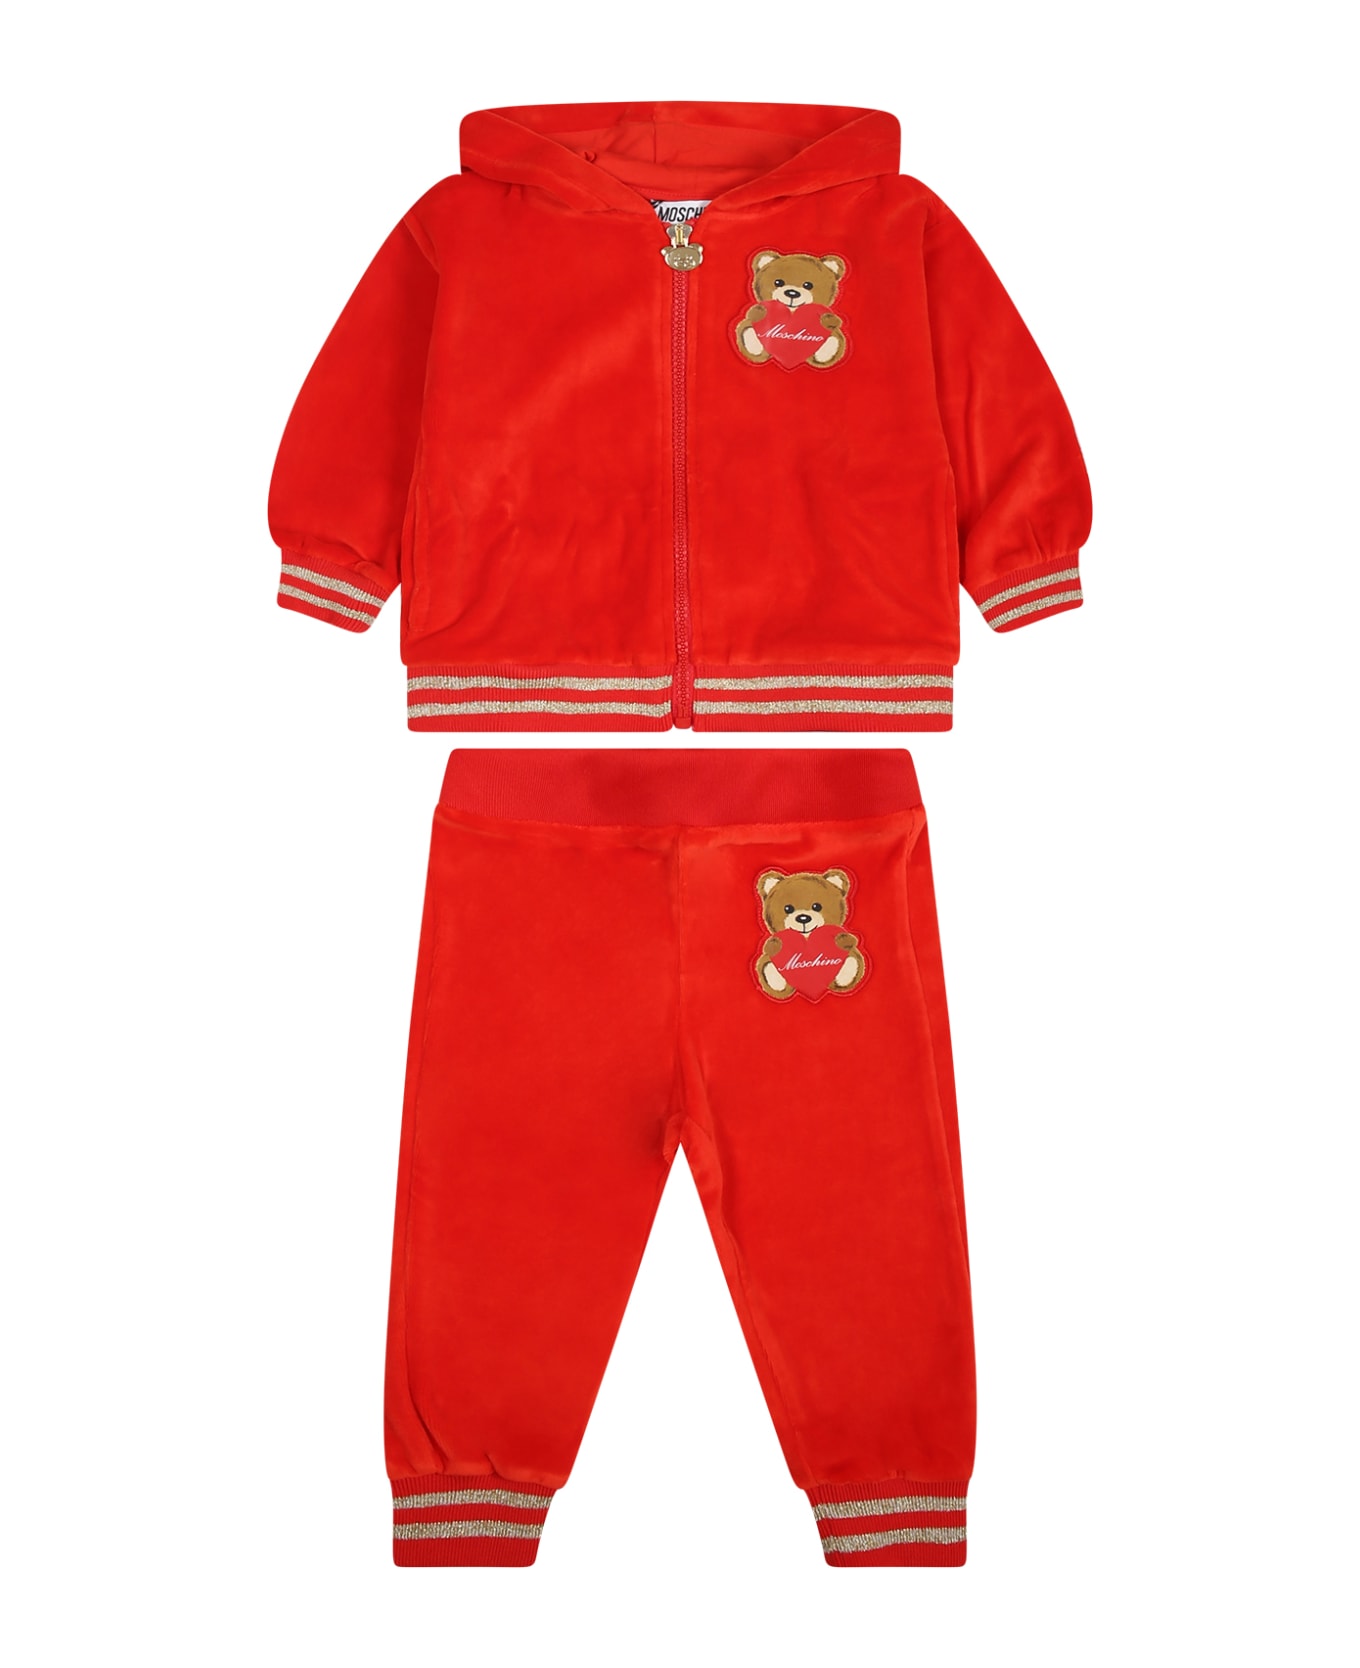 Moschino Red Suit For Baby Girl With Teddy Bear - Red ボトムス